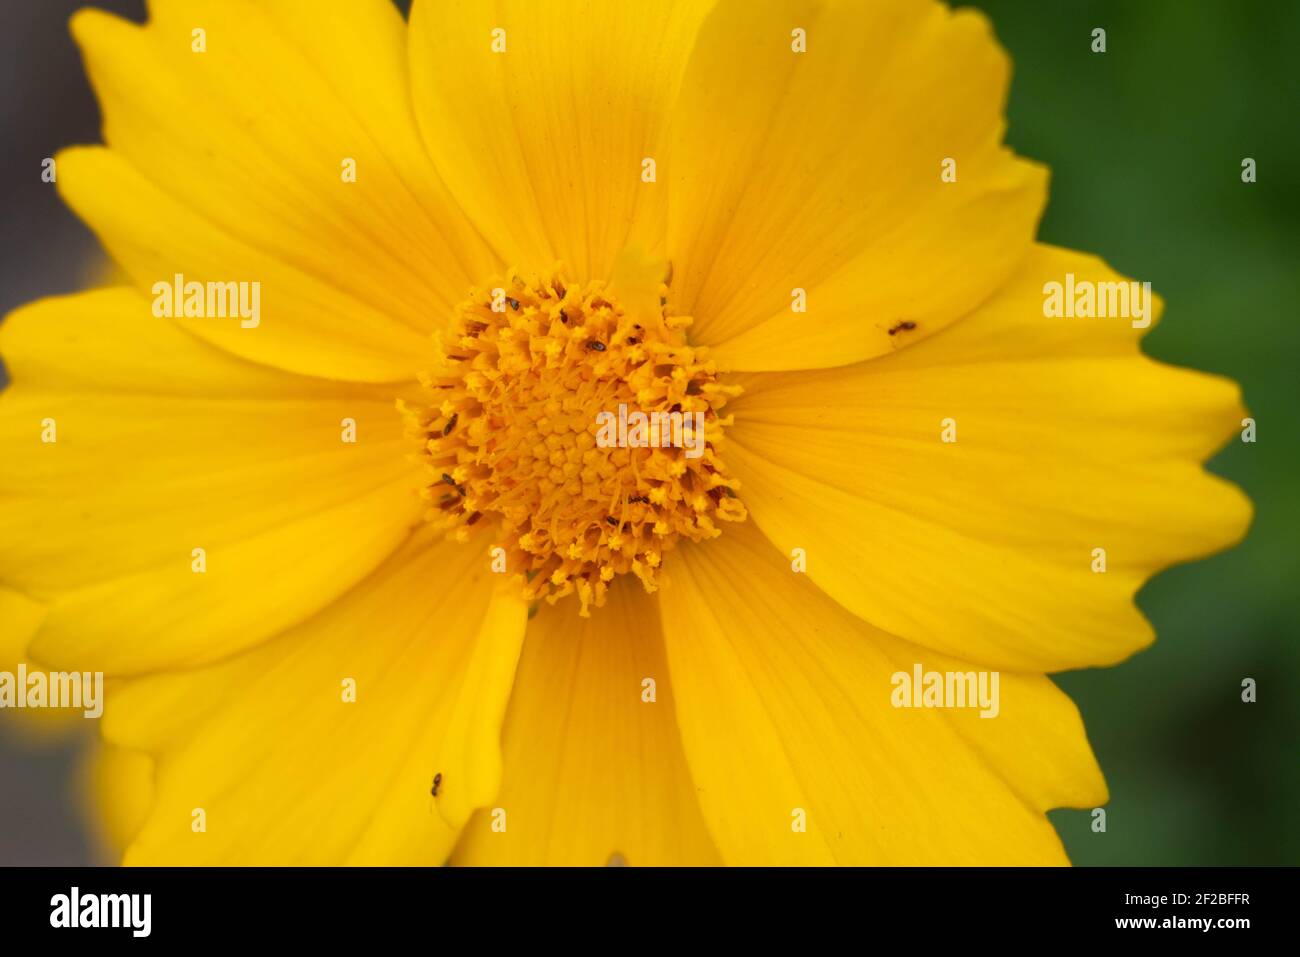 Huge yellow flower in full screen. The middle of the flower is clearly visible. Several small insects crawl along the petals Stock Photo